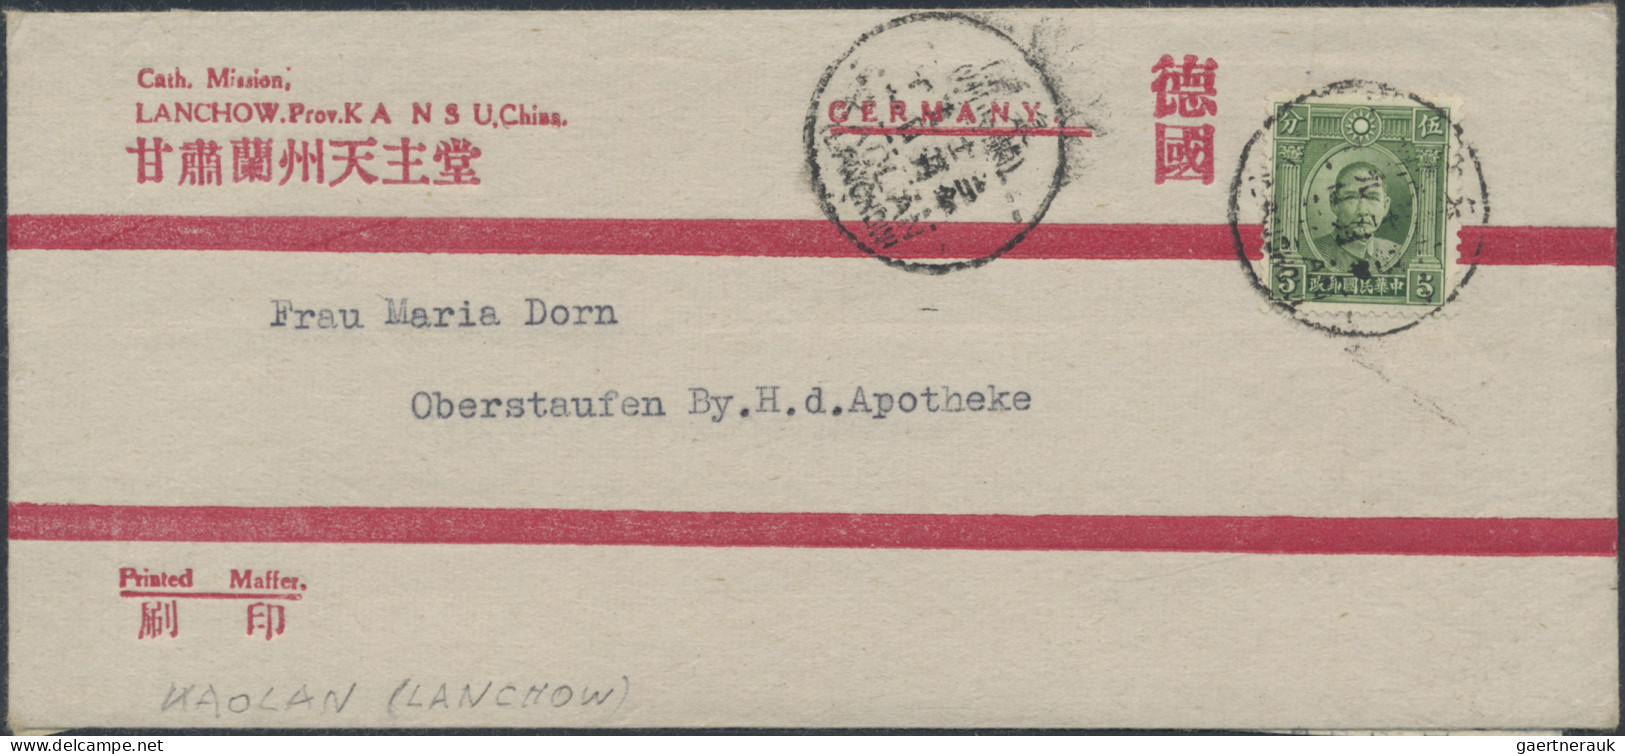 China: 1923/1948, covers (17) and cto/blanc FDC (3), including air mail, express